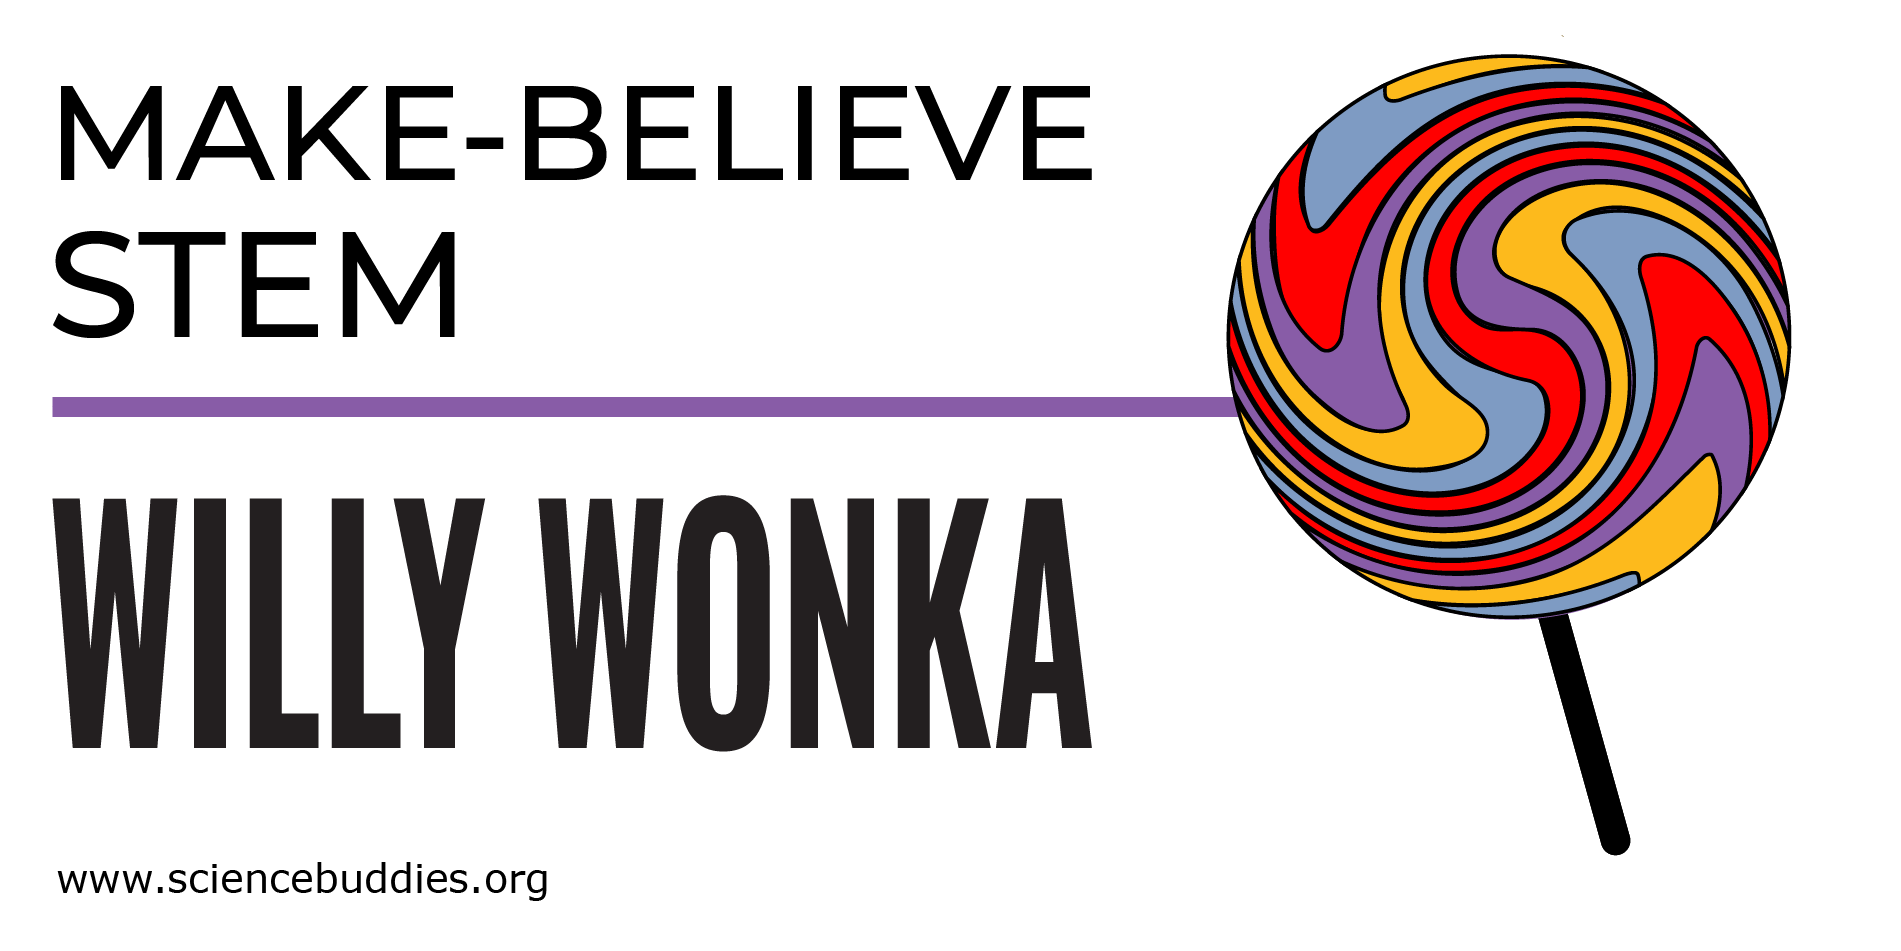 Willy Wonka Science and Make-Believe STEM